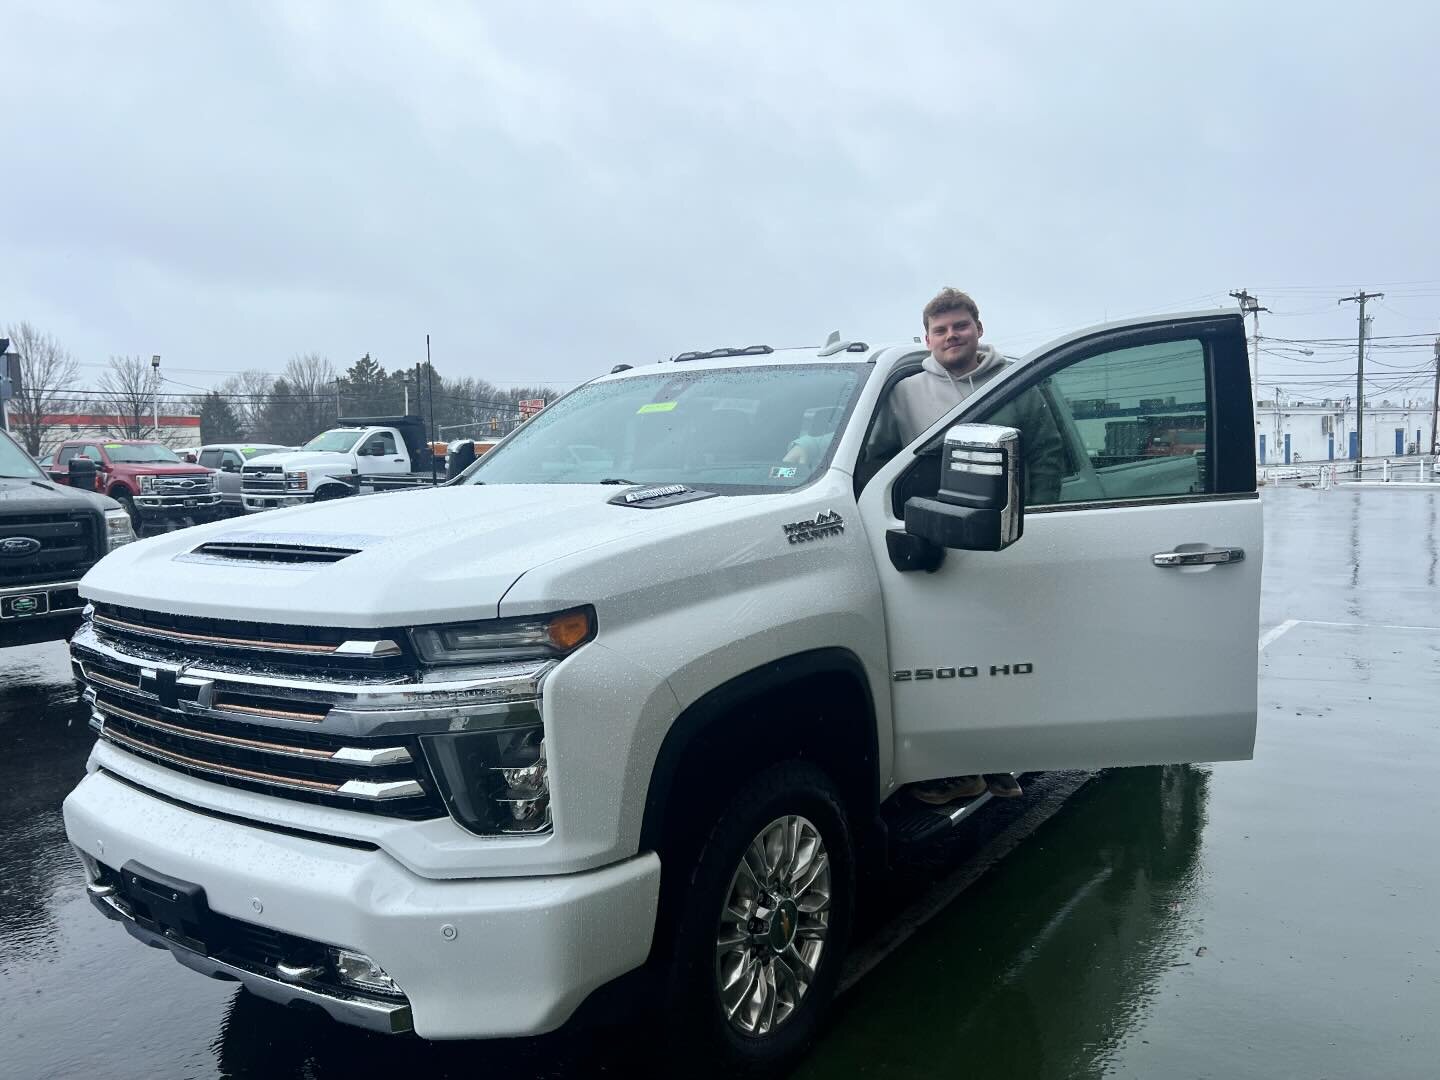 Congrats to Ben on his 2020 Chevy 2500 High Country DuraMax Diesel! We appreciate you making the trip down from New York, safe travels home 🙏